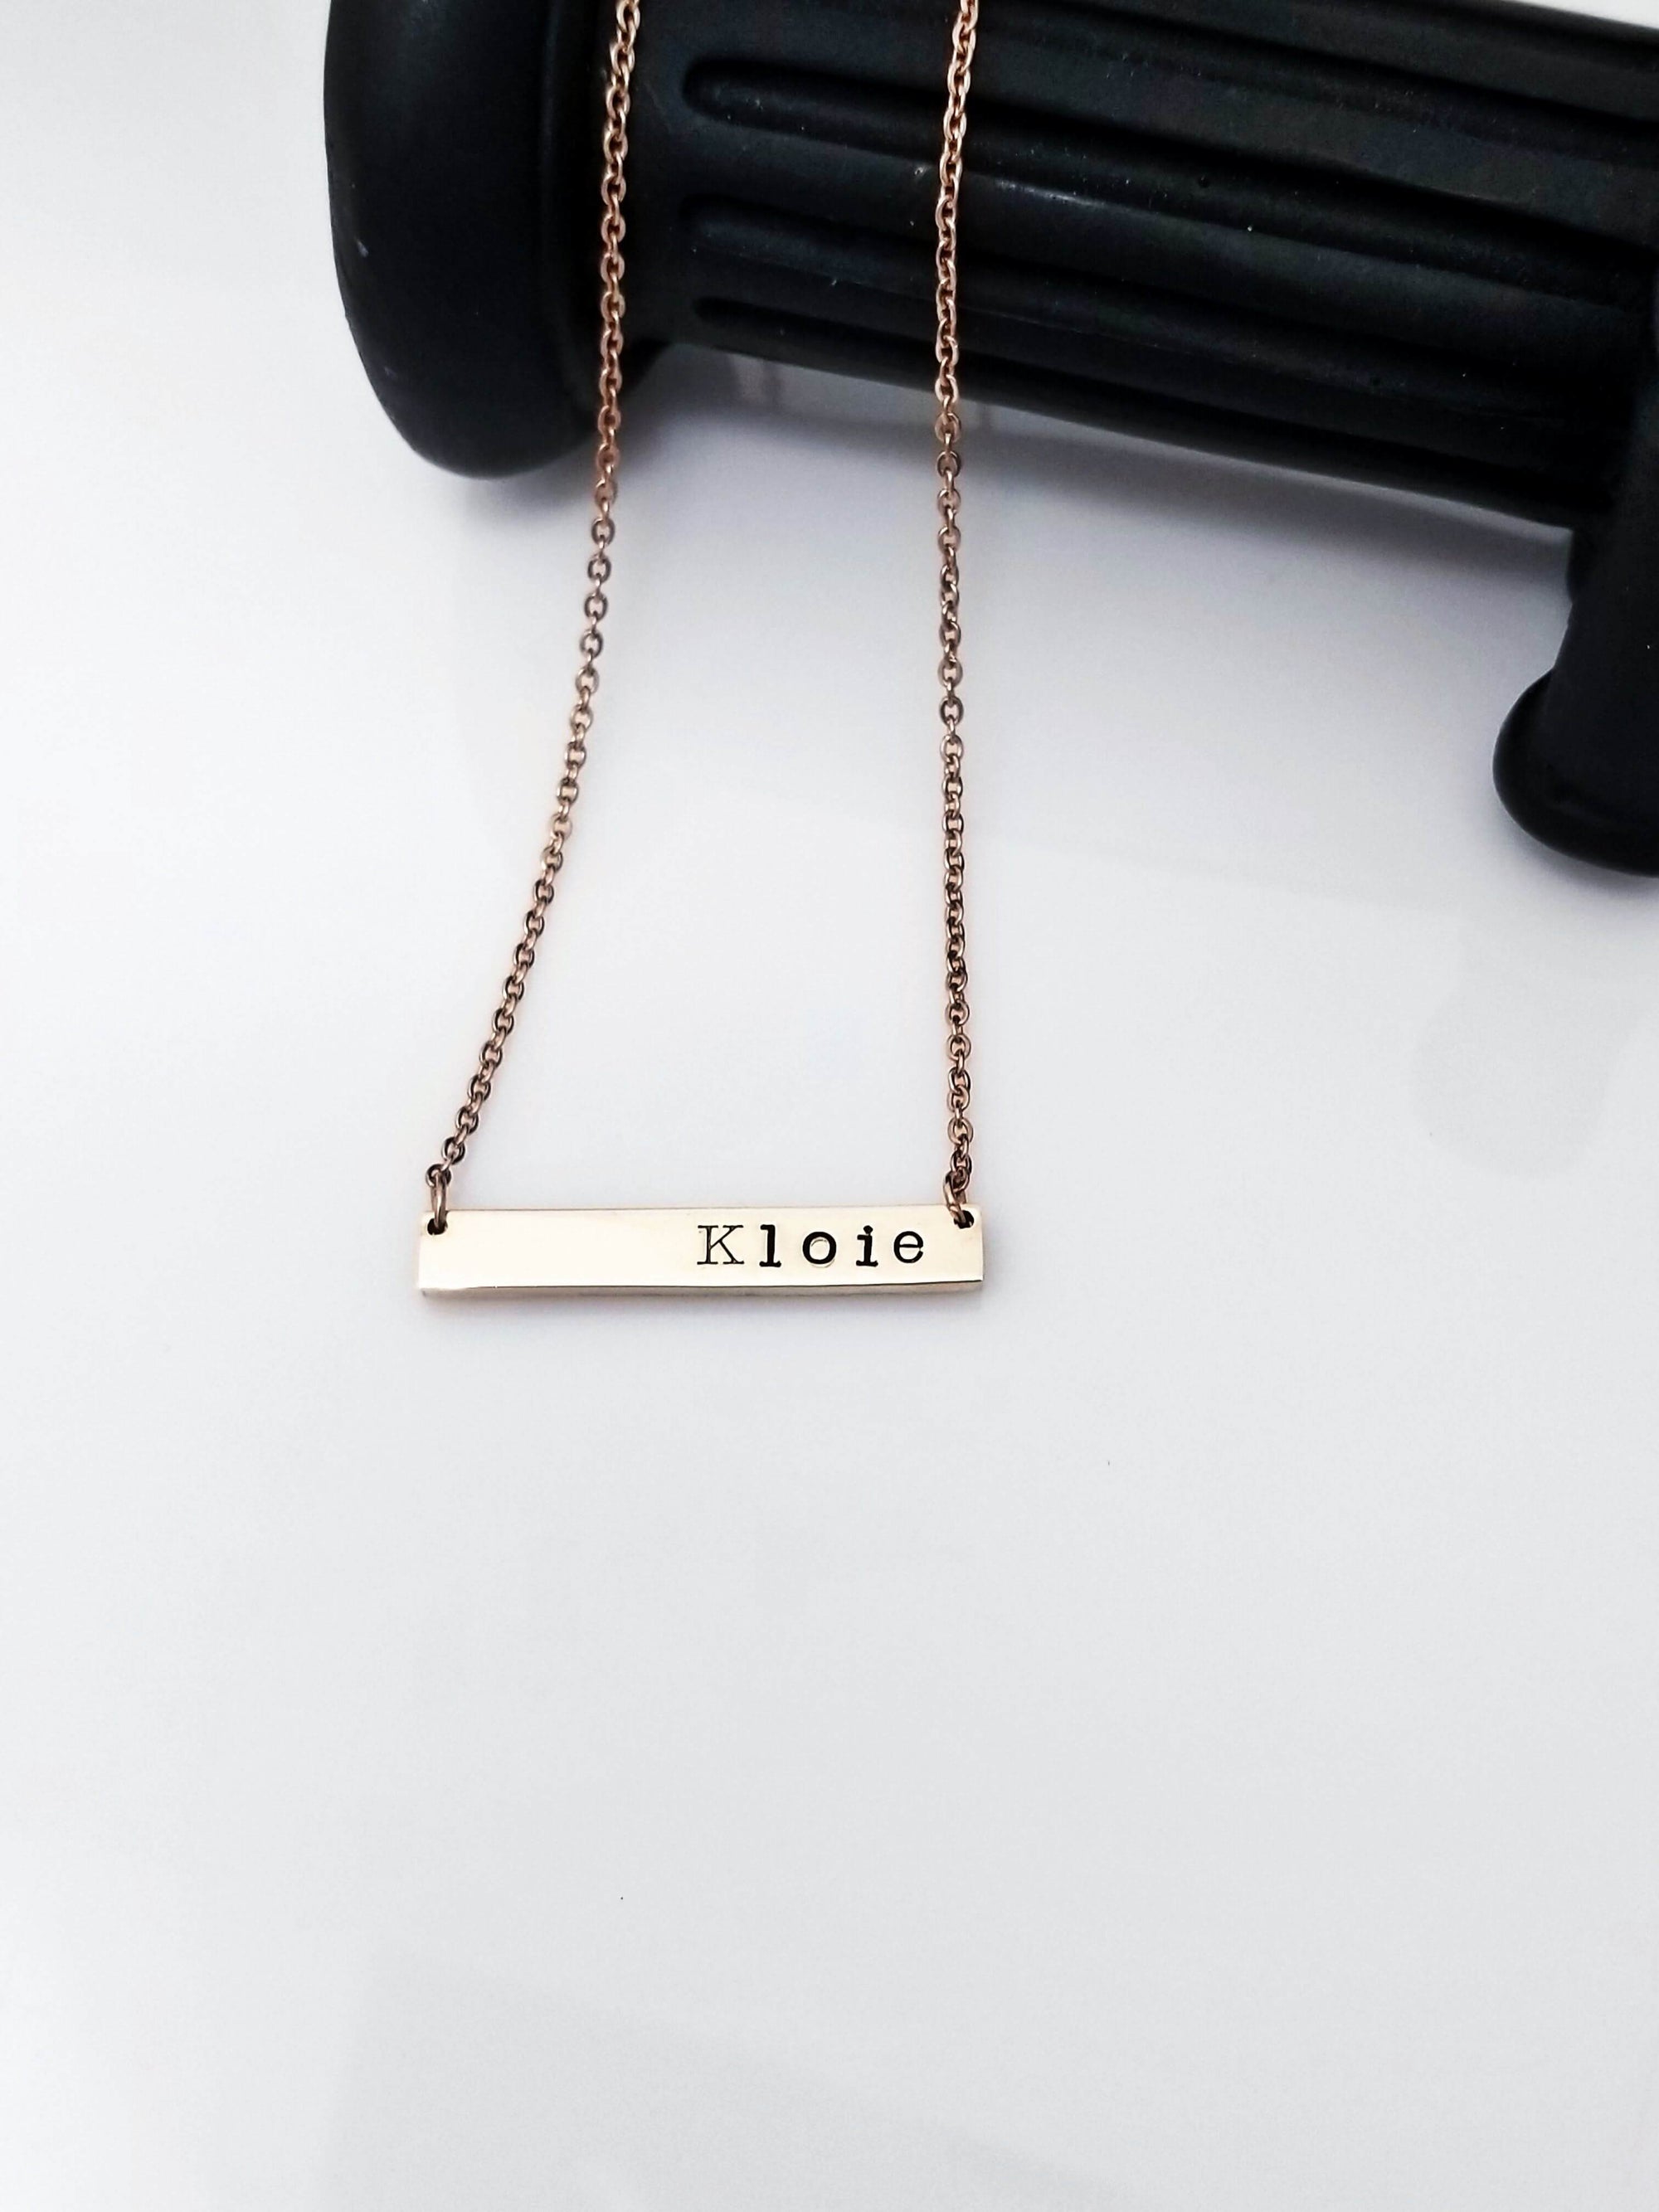 Name bar Necklace, custom hand stamped Necklace, Personalized Necklace, Silver Bar Necklace, Rose Gold Bar Necklace, Silver Name Necklace